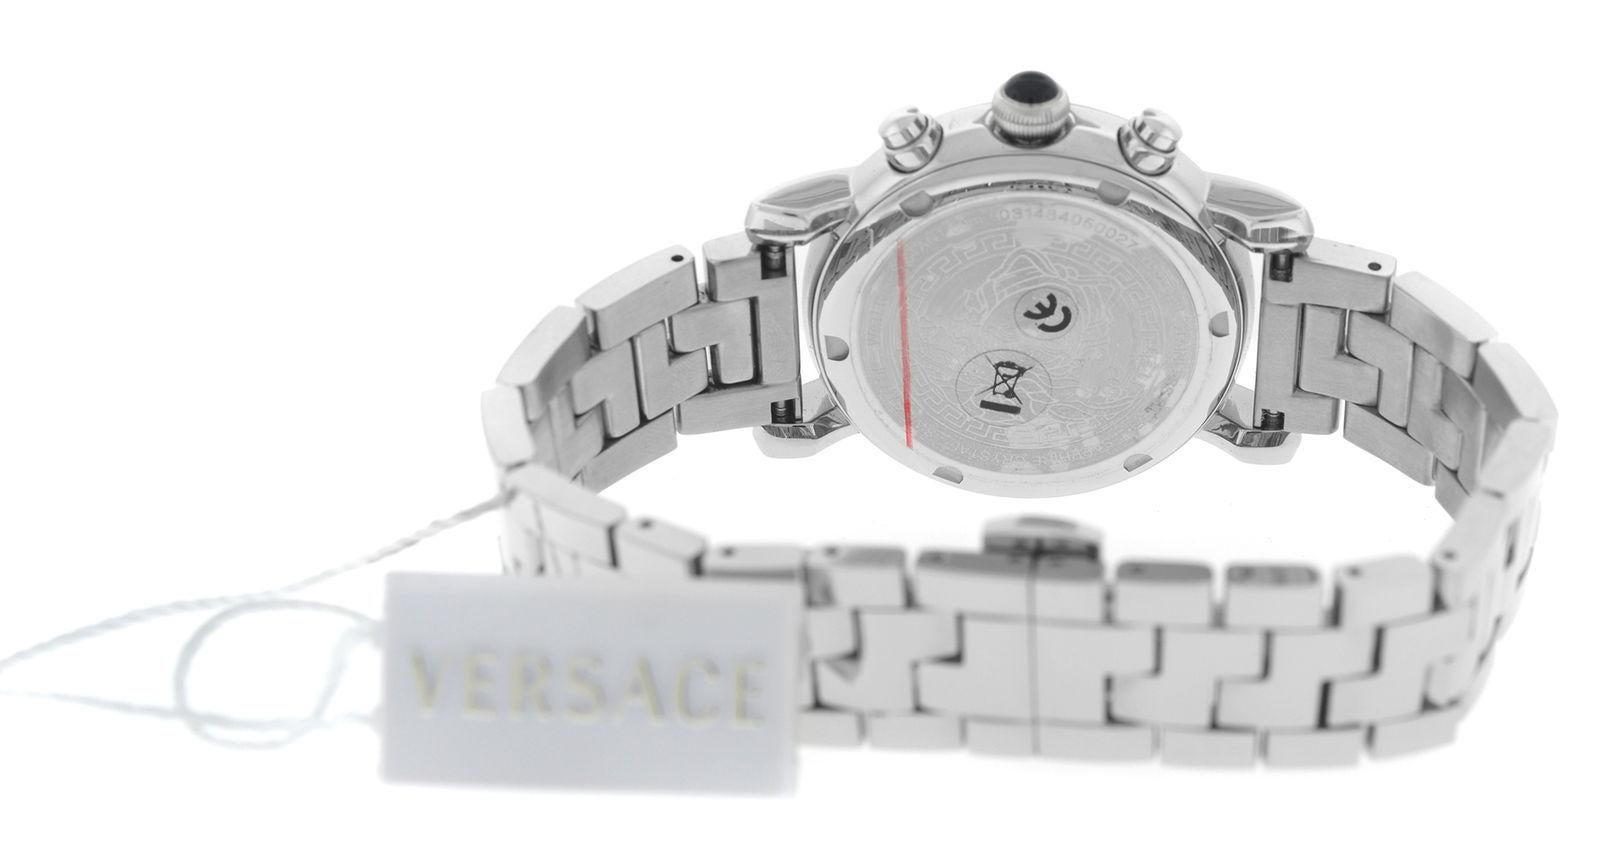 Brand	Versace
Model	Day Glam VLB08 0014
Gender	Ladies
Condition	New
Movement	Swiss Quartz
Case Material	Stainless Steel 
Bracelet / Strap Material	
Stainless Steel

Clasp / Buckle Material	
Stainless Steel

Clasp Type	Butterfly deployment
Bracelet /